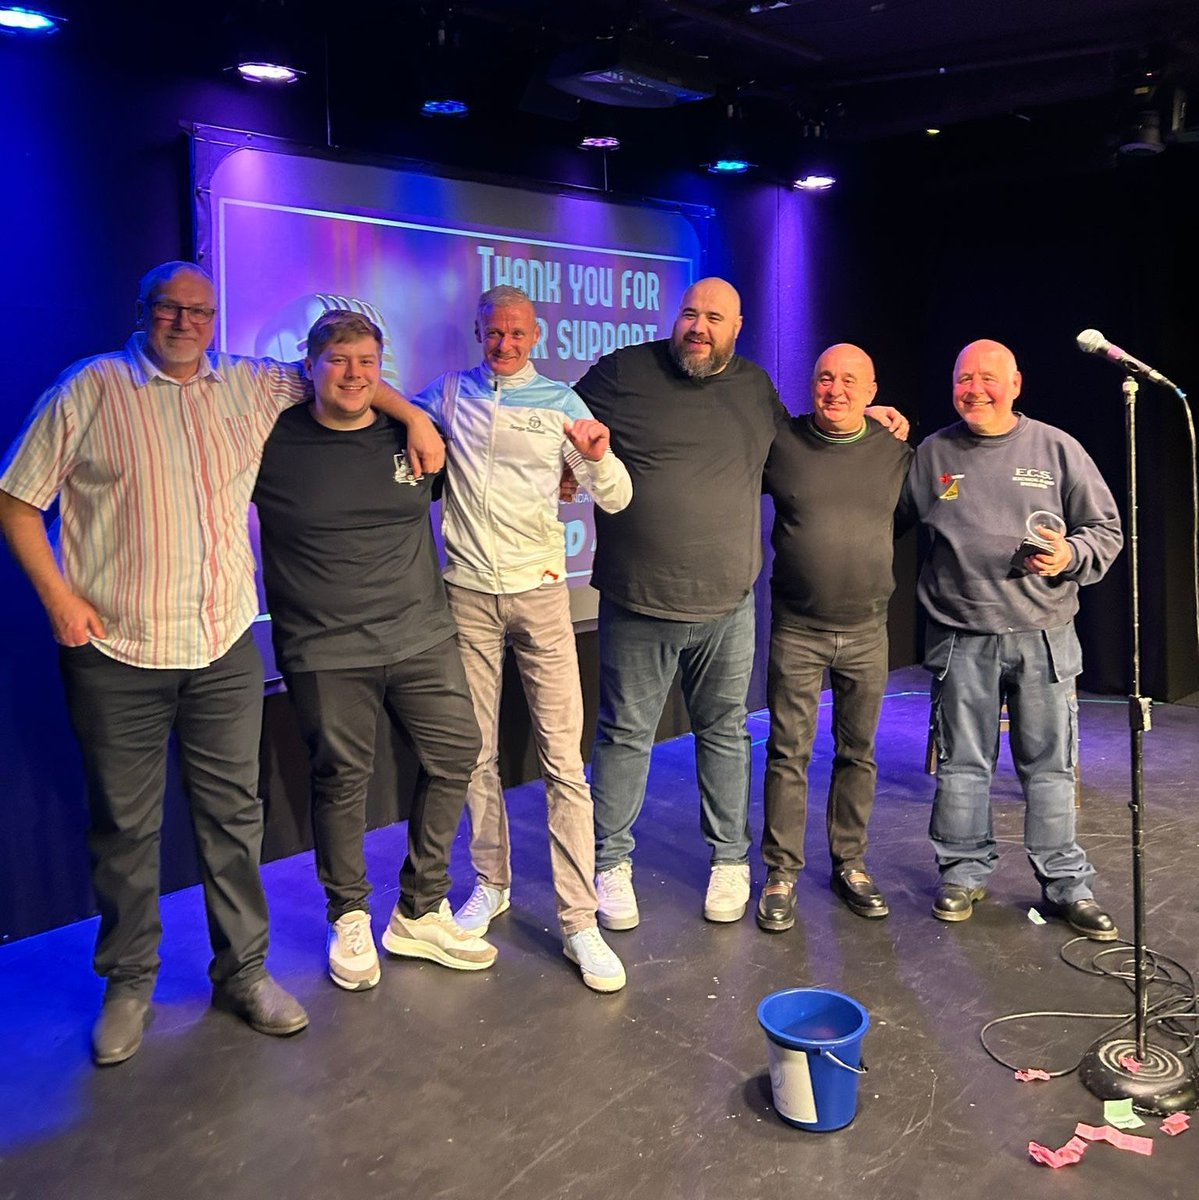 Congrats to our comedians! You absolutely smashed it last night at Beyond a Joke. Thank you for your dedication and hard work 💙